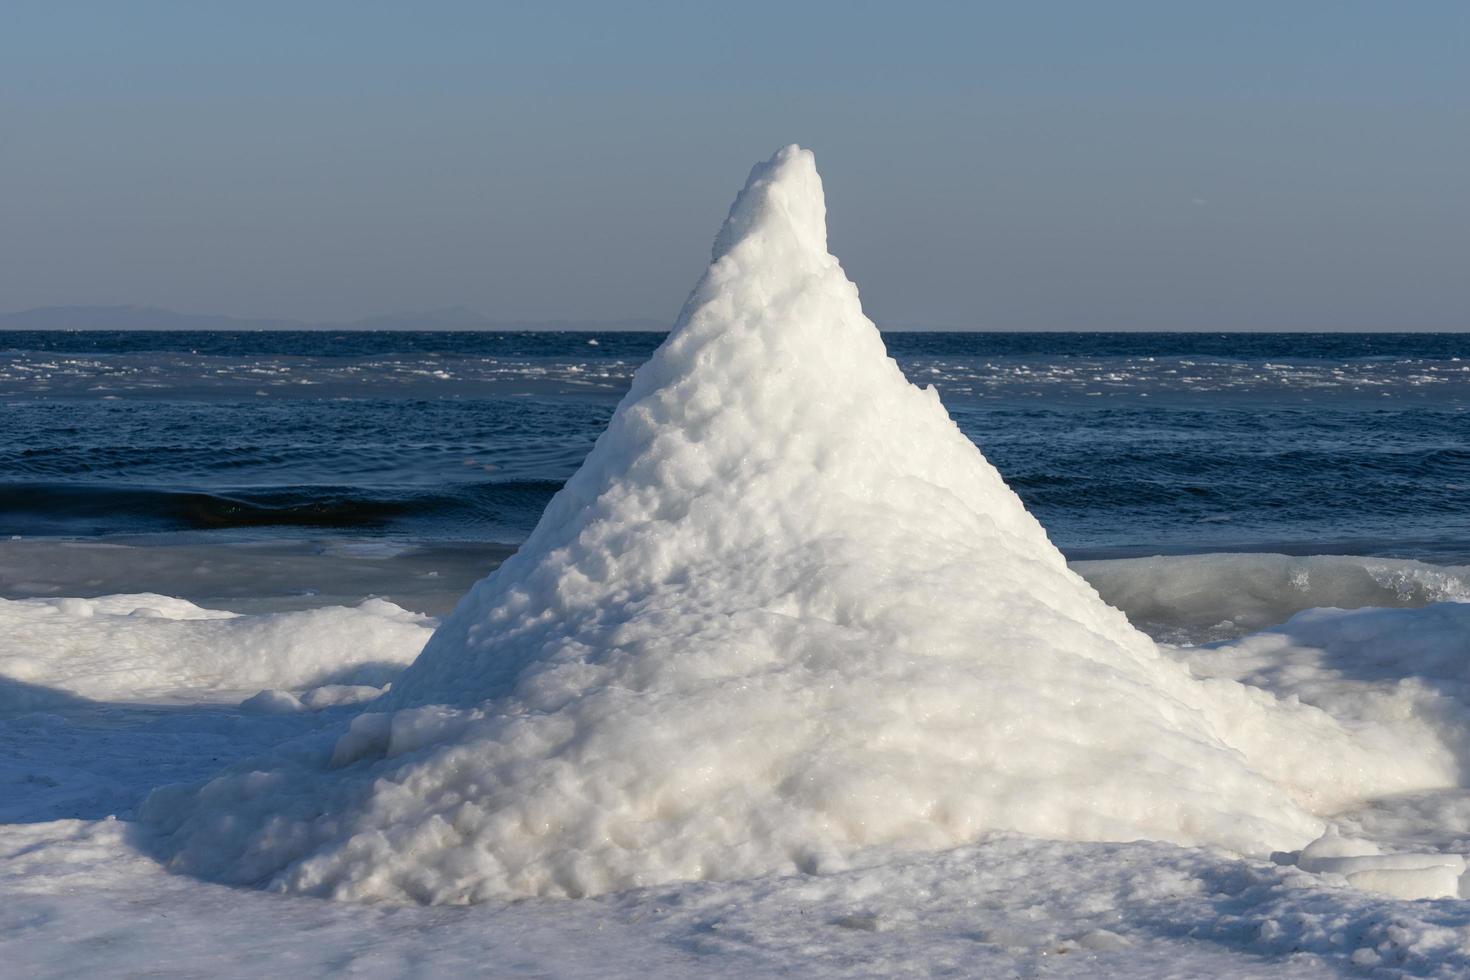 A snow pyramid on the shore of the Pacific ocean. photo